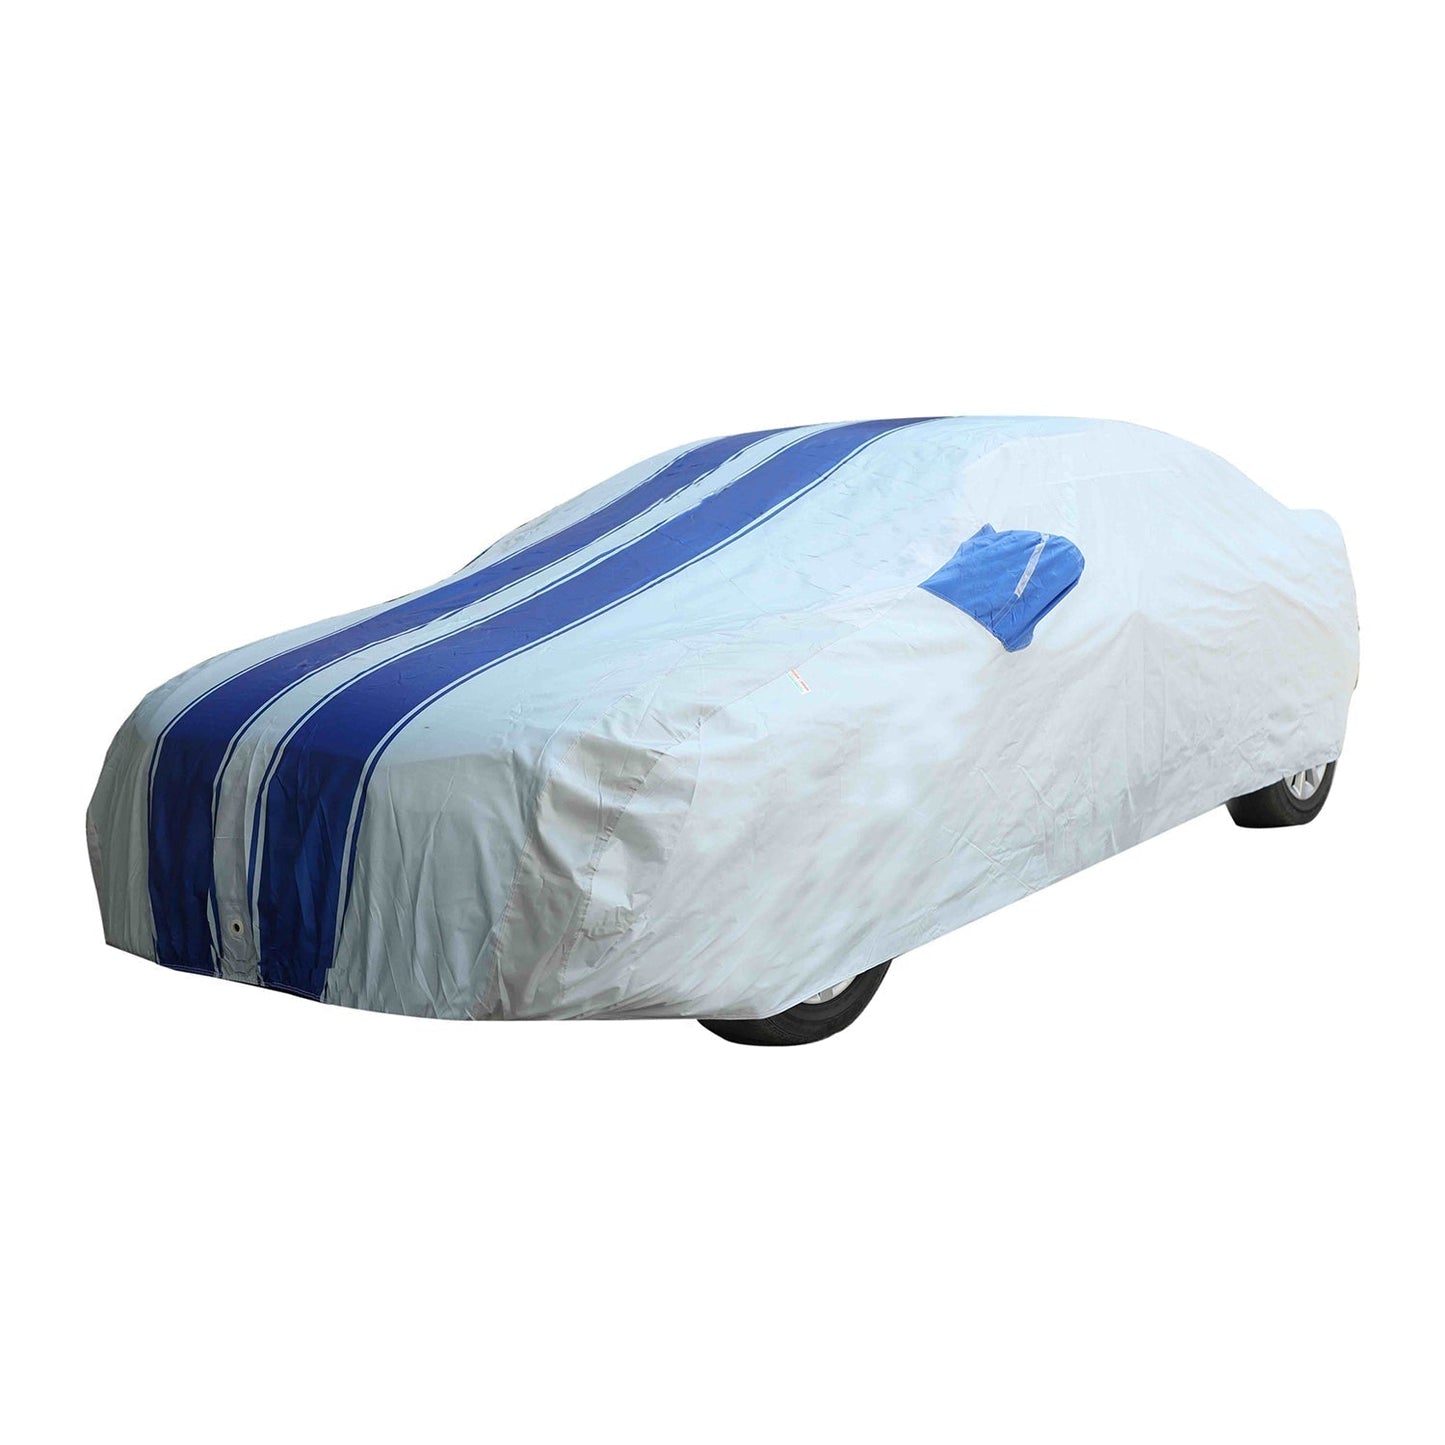 Oshotto 100% Blue dustproof and Water Resistant Car Body Cover with Mirror Pockets For Mercedes Benz A-Class Limousine 200